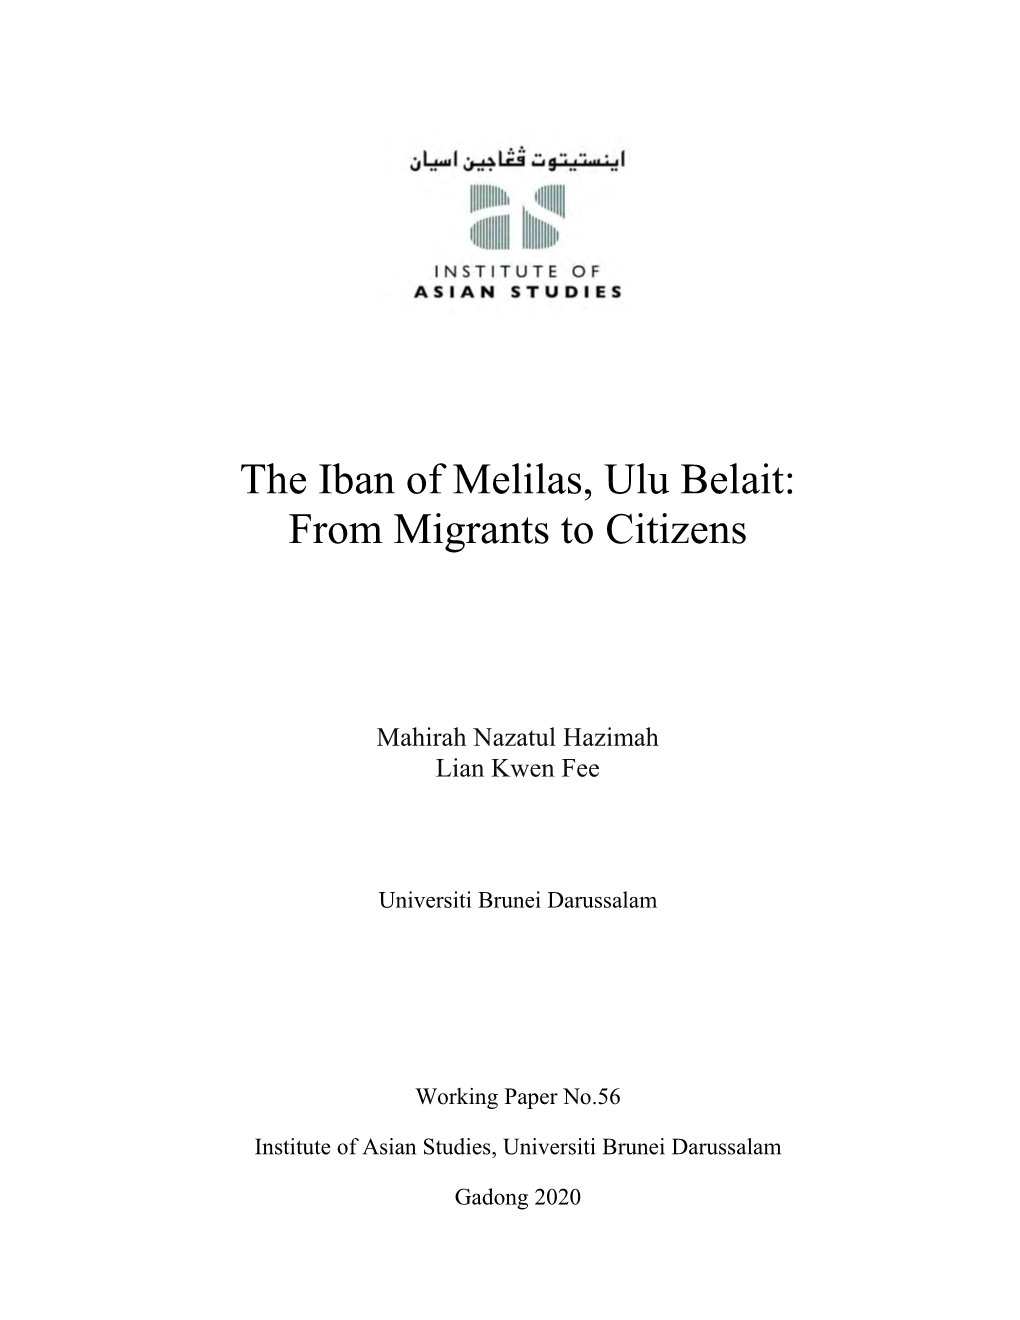 The Iban of Melilas, Ulu Belait: from Migrants to Citizens